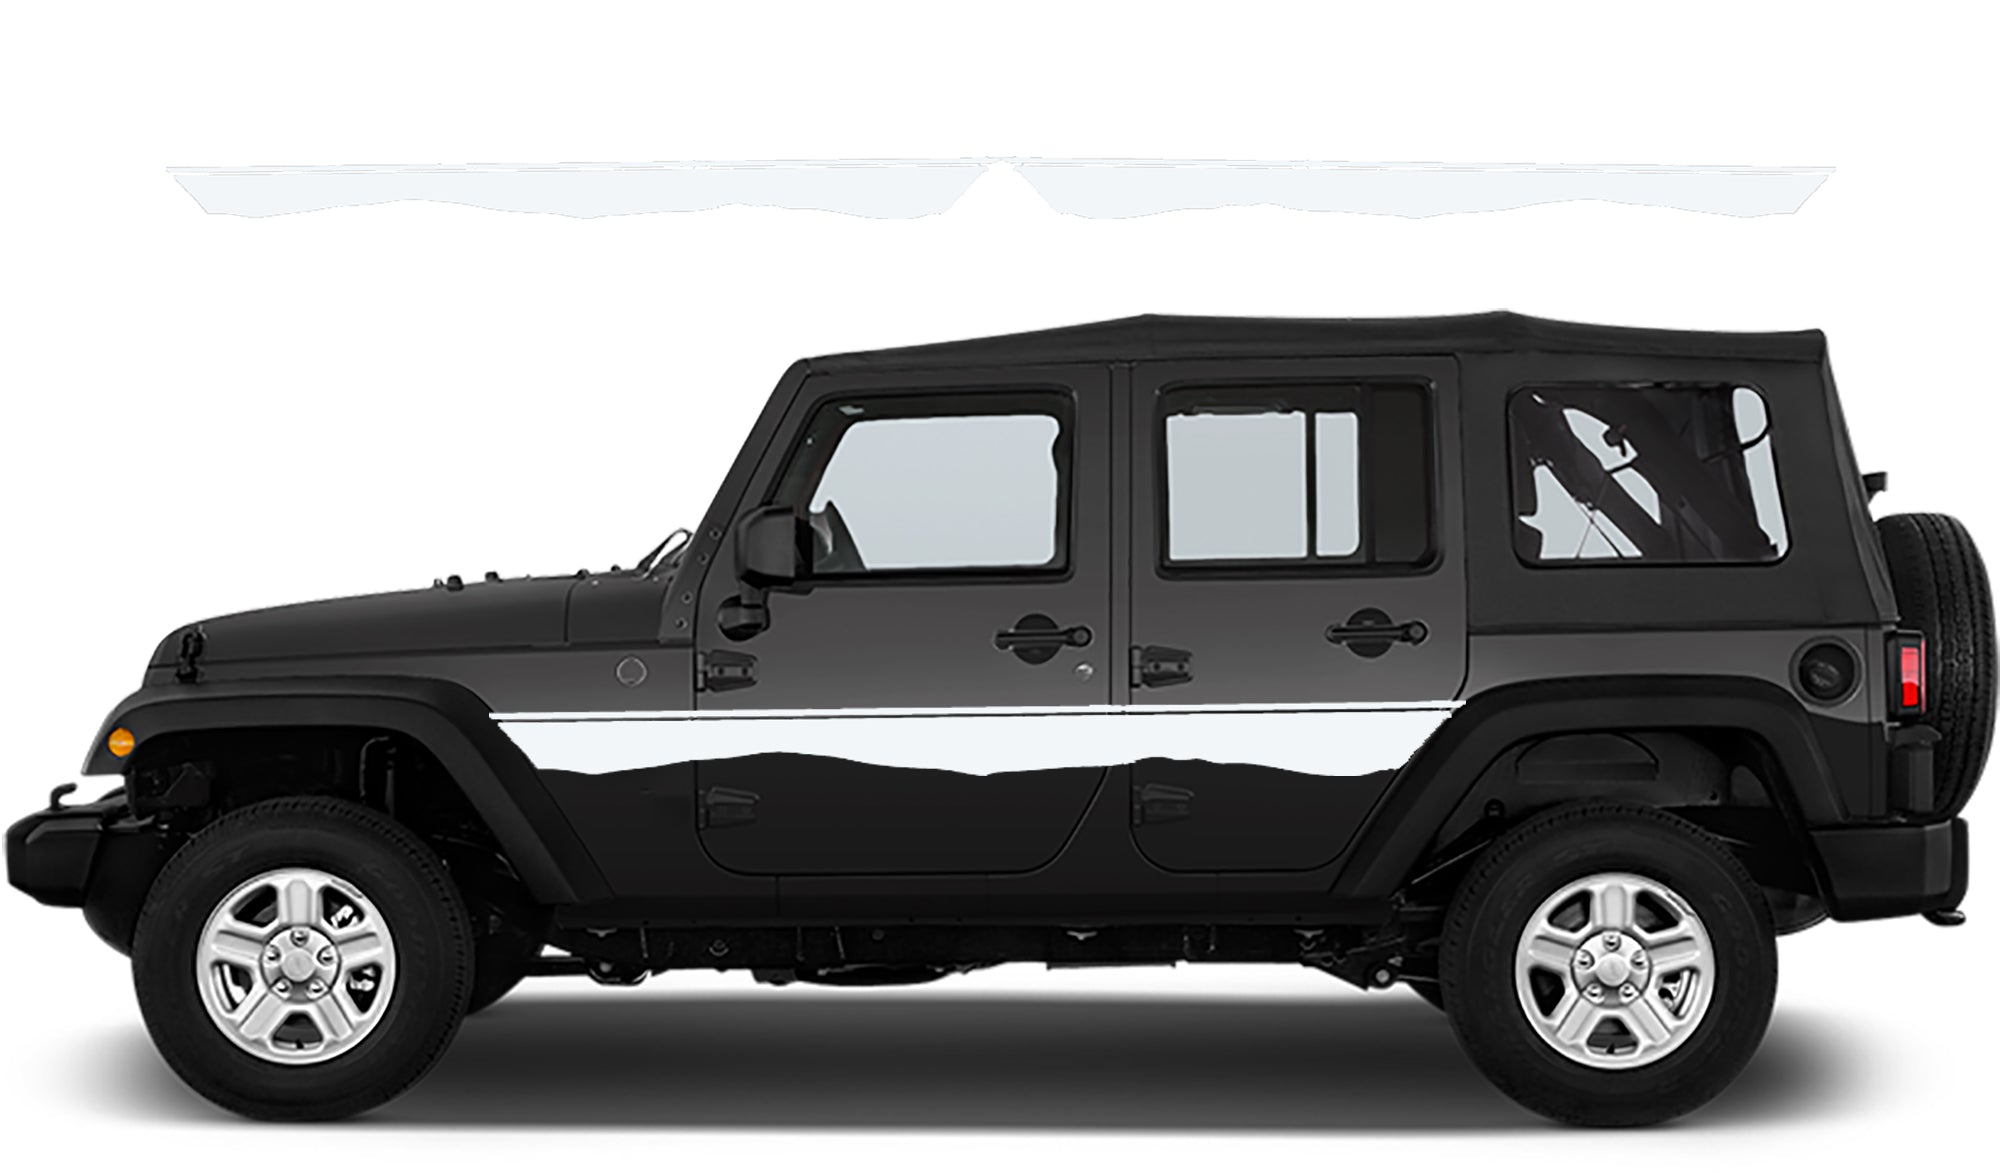 Jeep Wrangler JK Mountain Lines Side Decals (Pair) : Vinyl Graphics Kit fits (2007-2018)